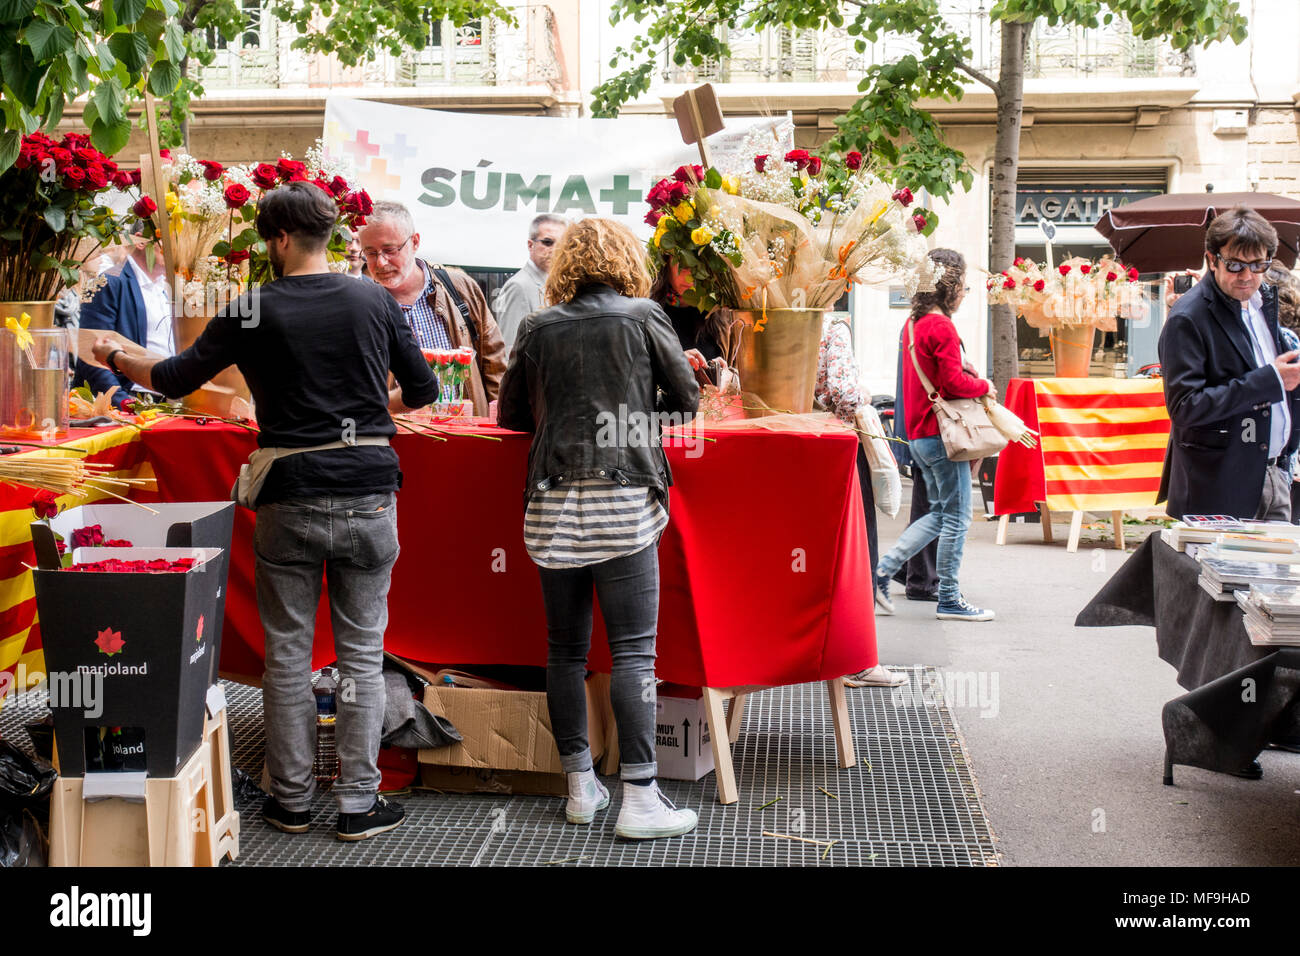 Barcelona, Spain. April 23, 2018: Diada de Sant Jordi or Saint George's Day or The Day of Books and Roses, a famous Catalan celebration. People sellin Stock Photo